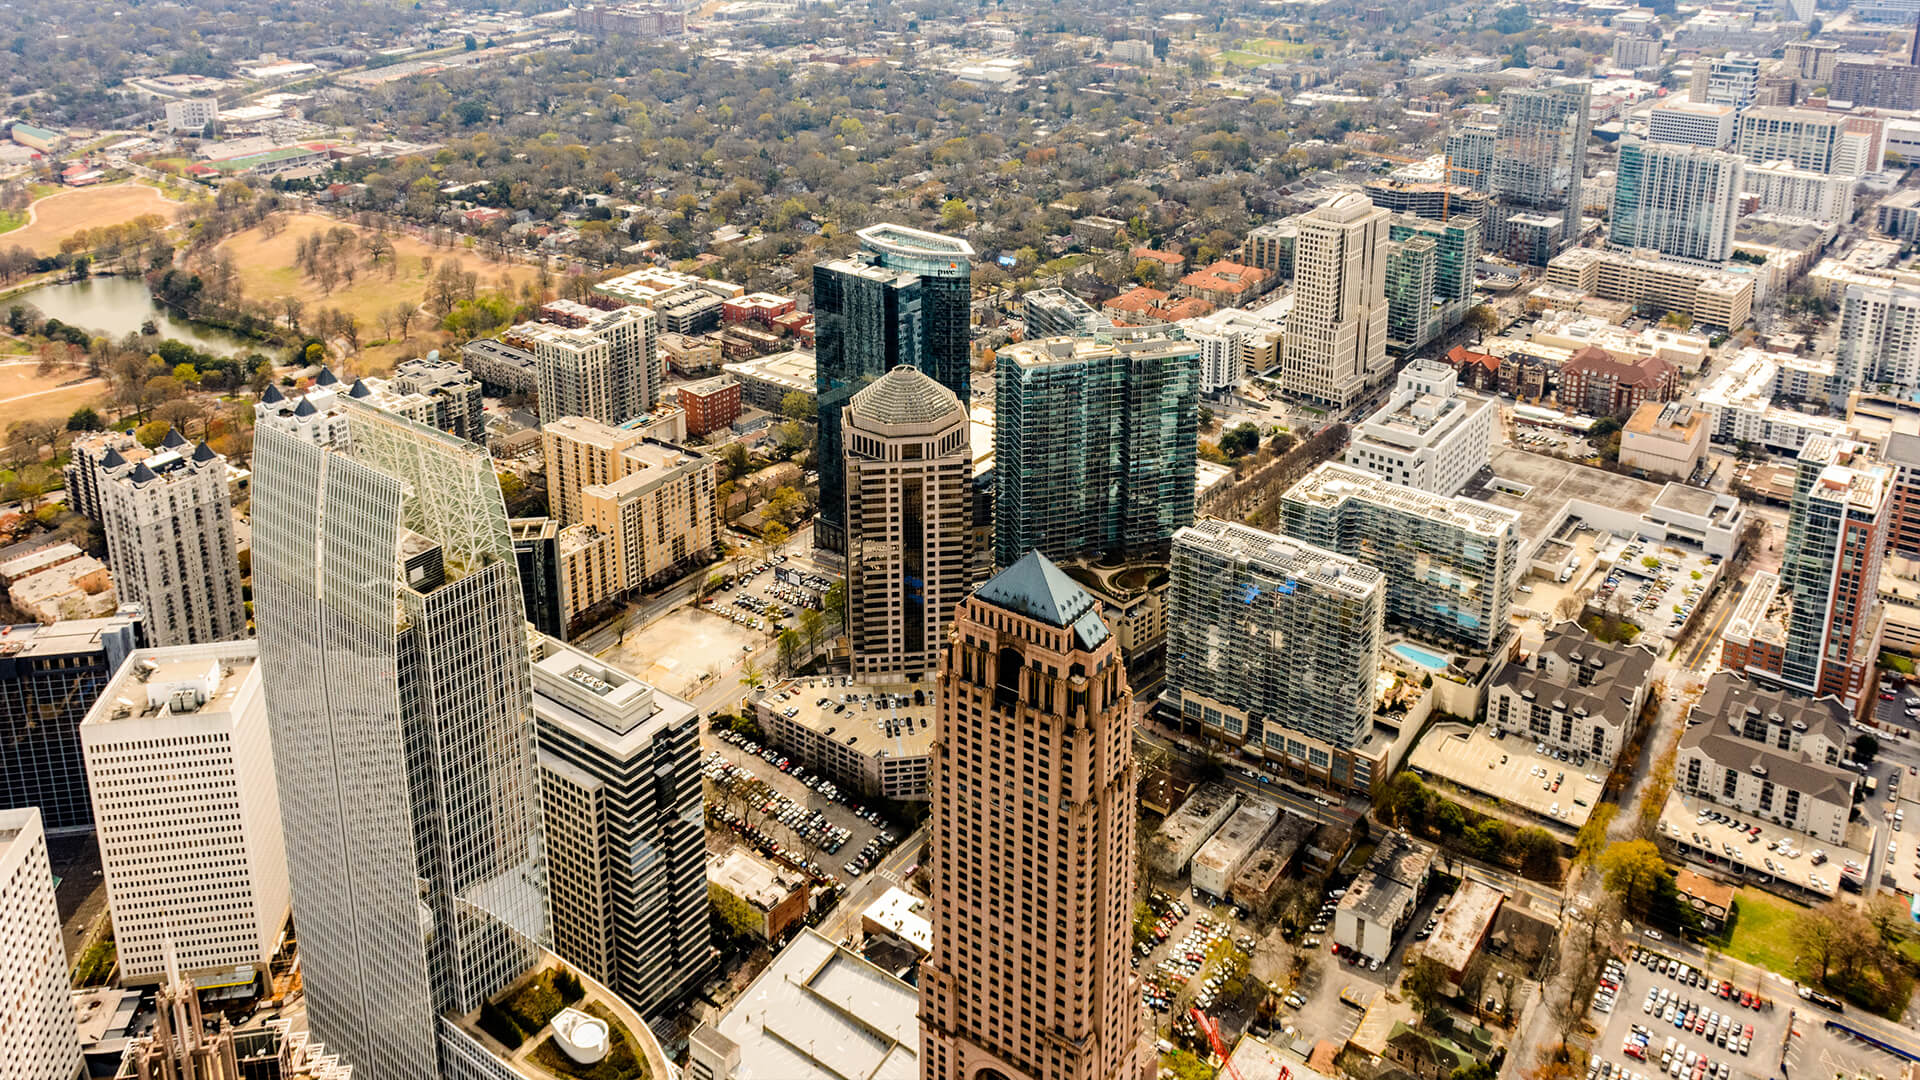 Construction ramping up on new 1105 West Peachtree tower